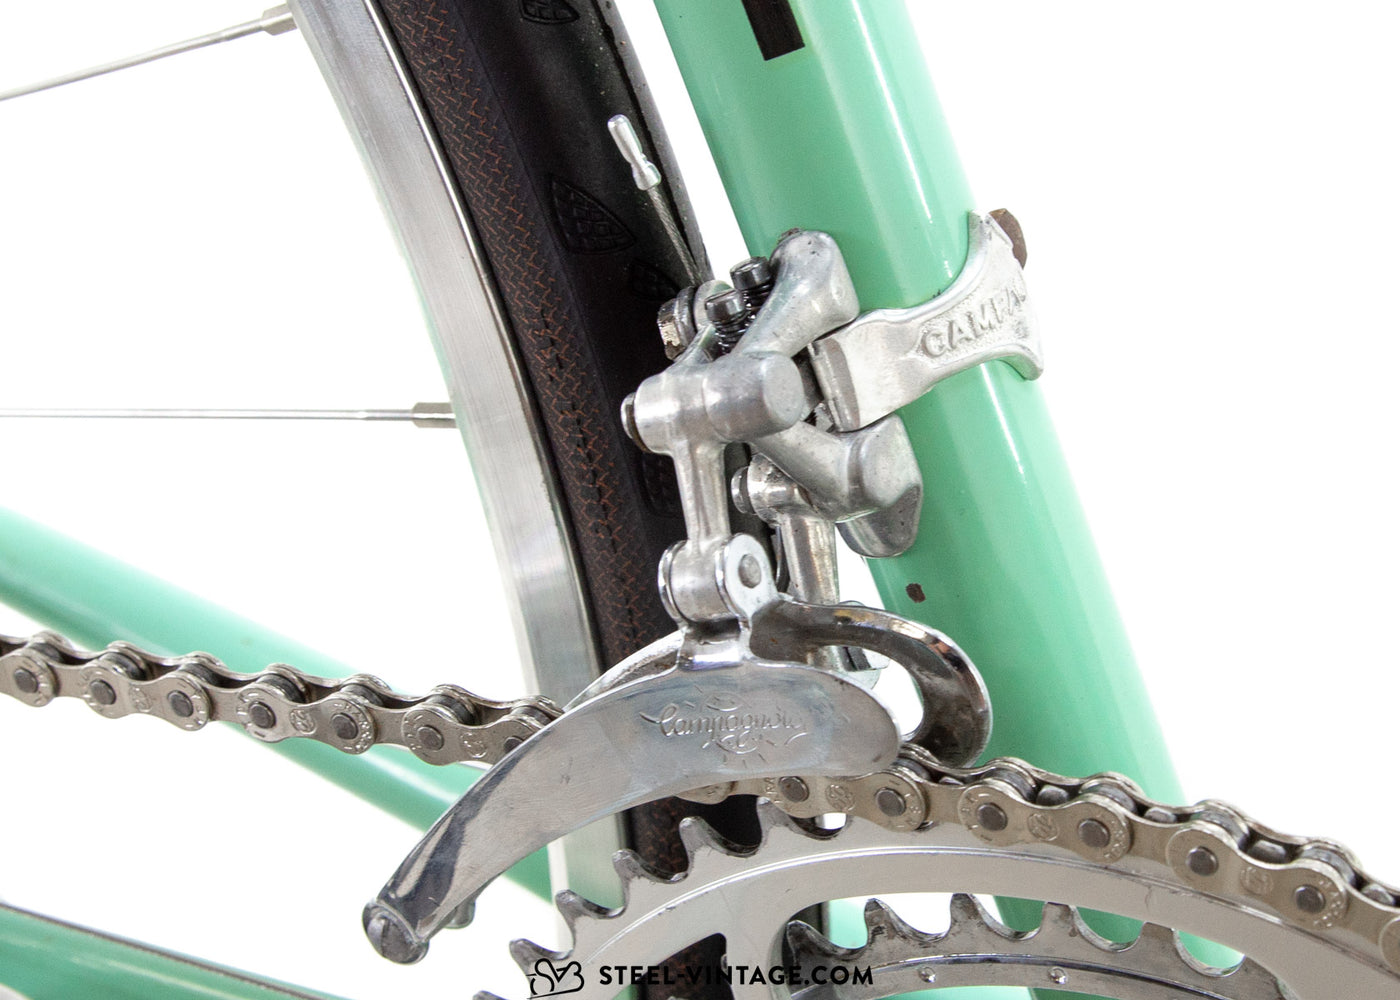 Bianchi Specialissima Road Bicycle 1970s